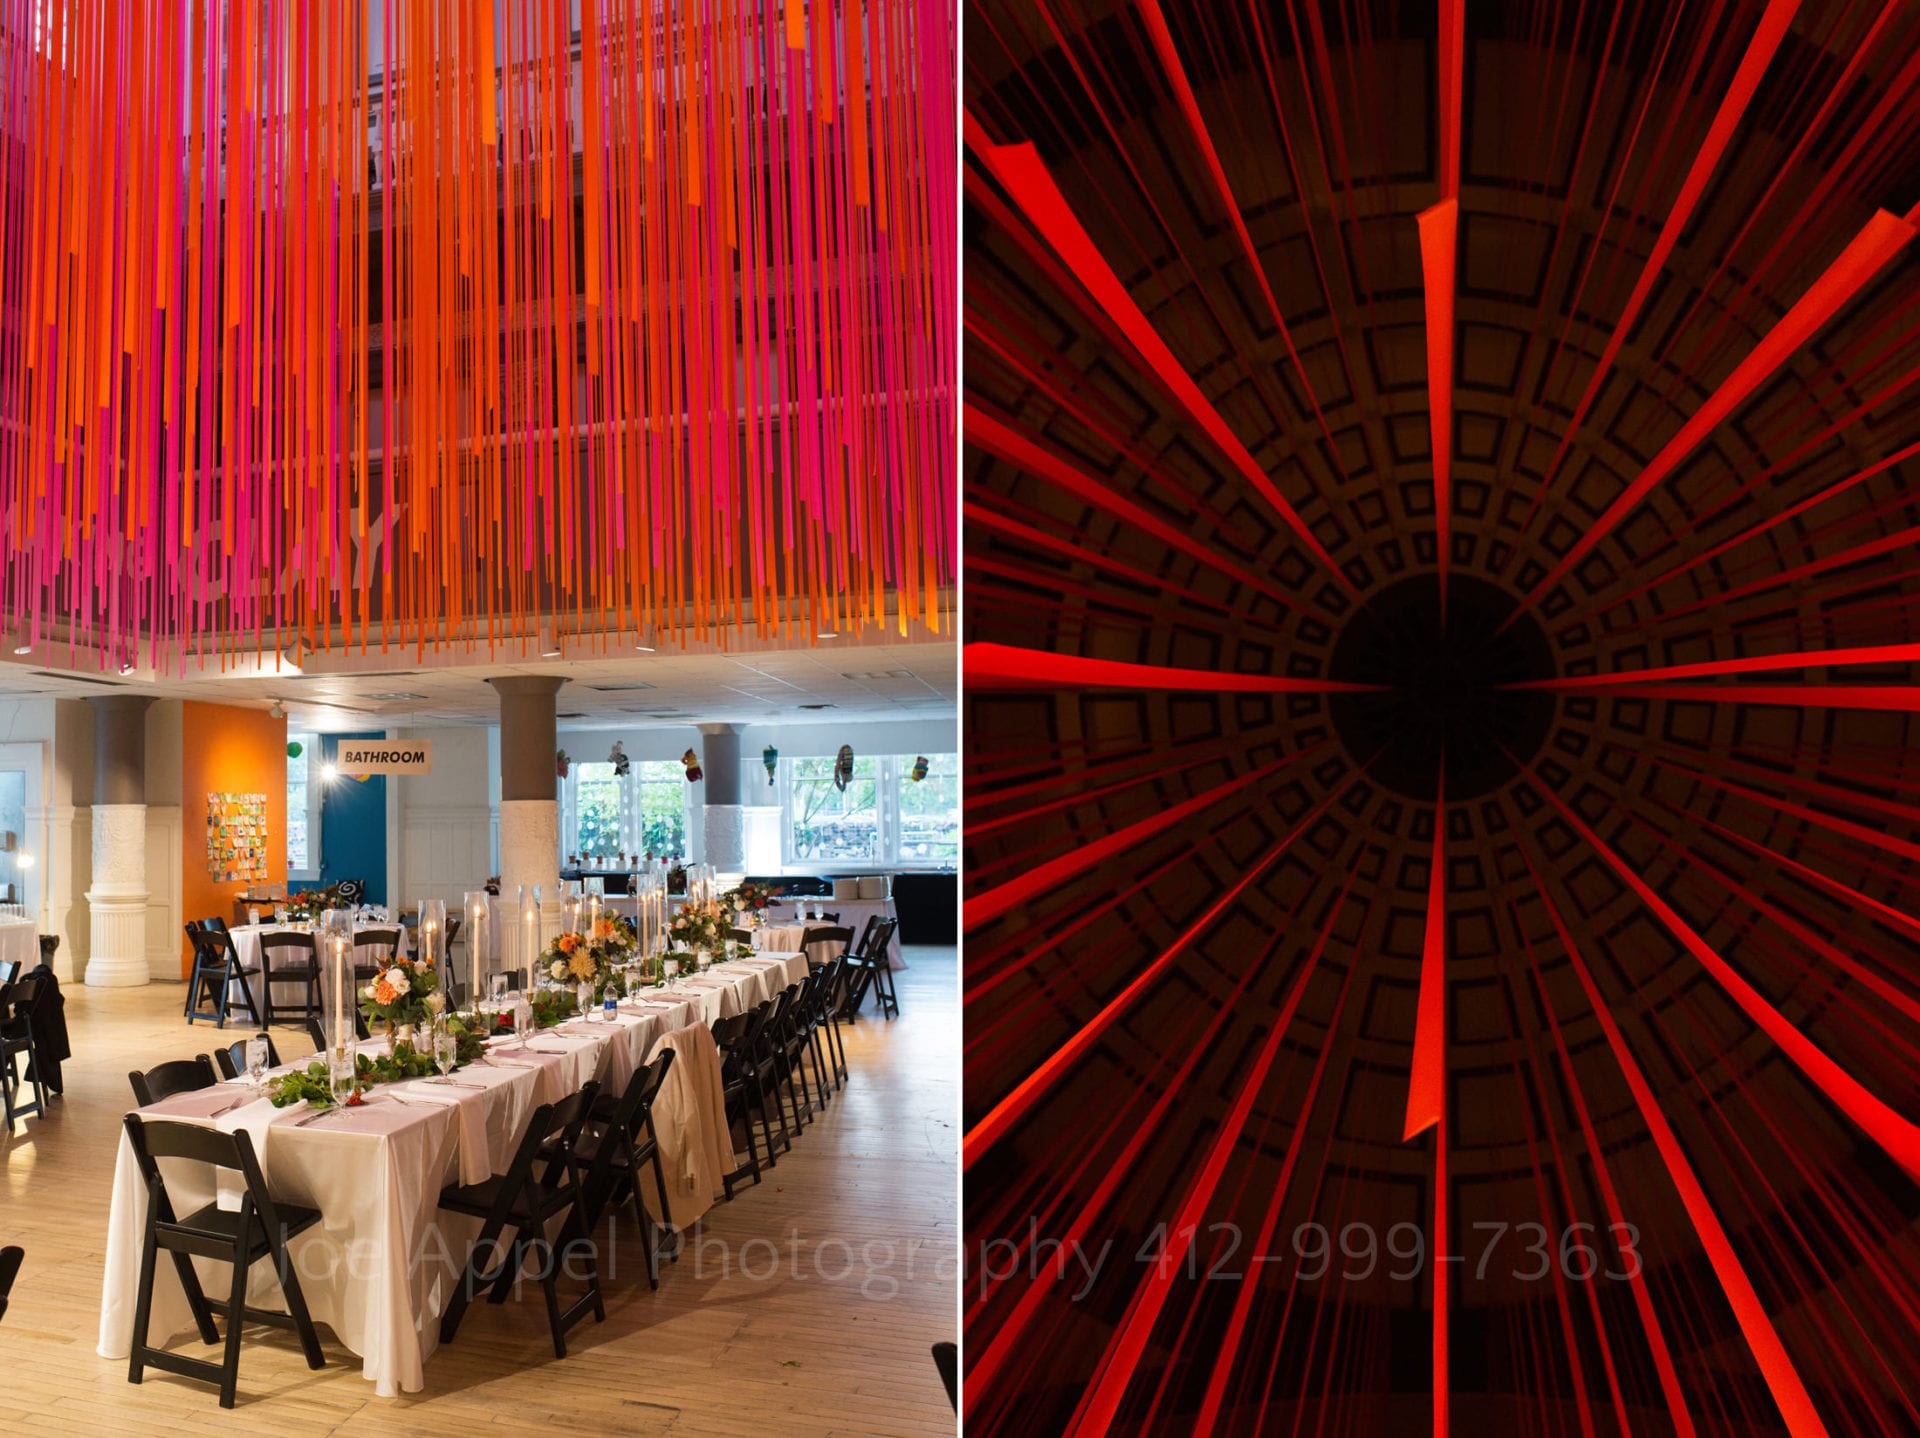 Two views of a room with a long table set for a wedding banquet. Pink ribbons hang from the high ceiling.